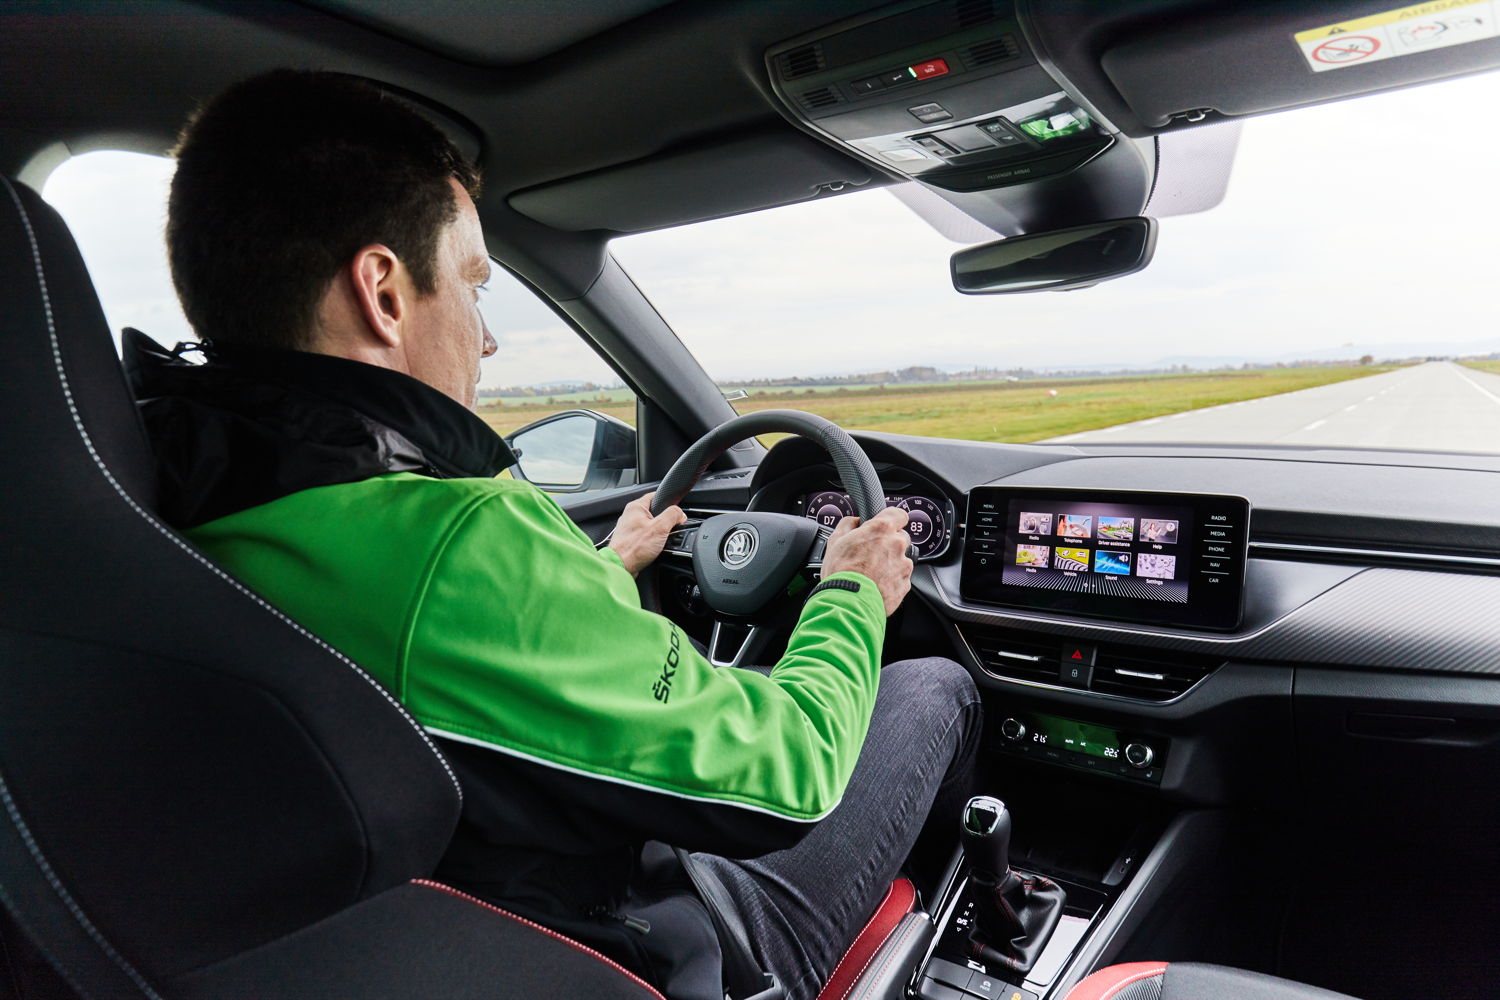 ŠKODA Motorsport works driver Jan Kopecký has valuable tips for
drivers on how to recognise treacherous road conditions in good
time and how to keep their vehicle safely under control even under
challenging conditions.